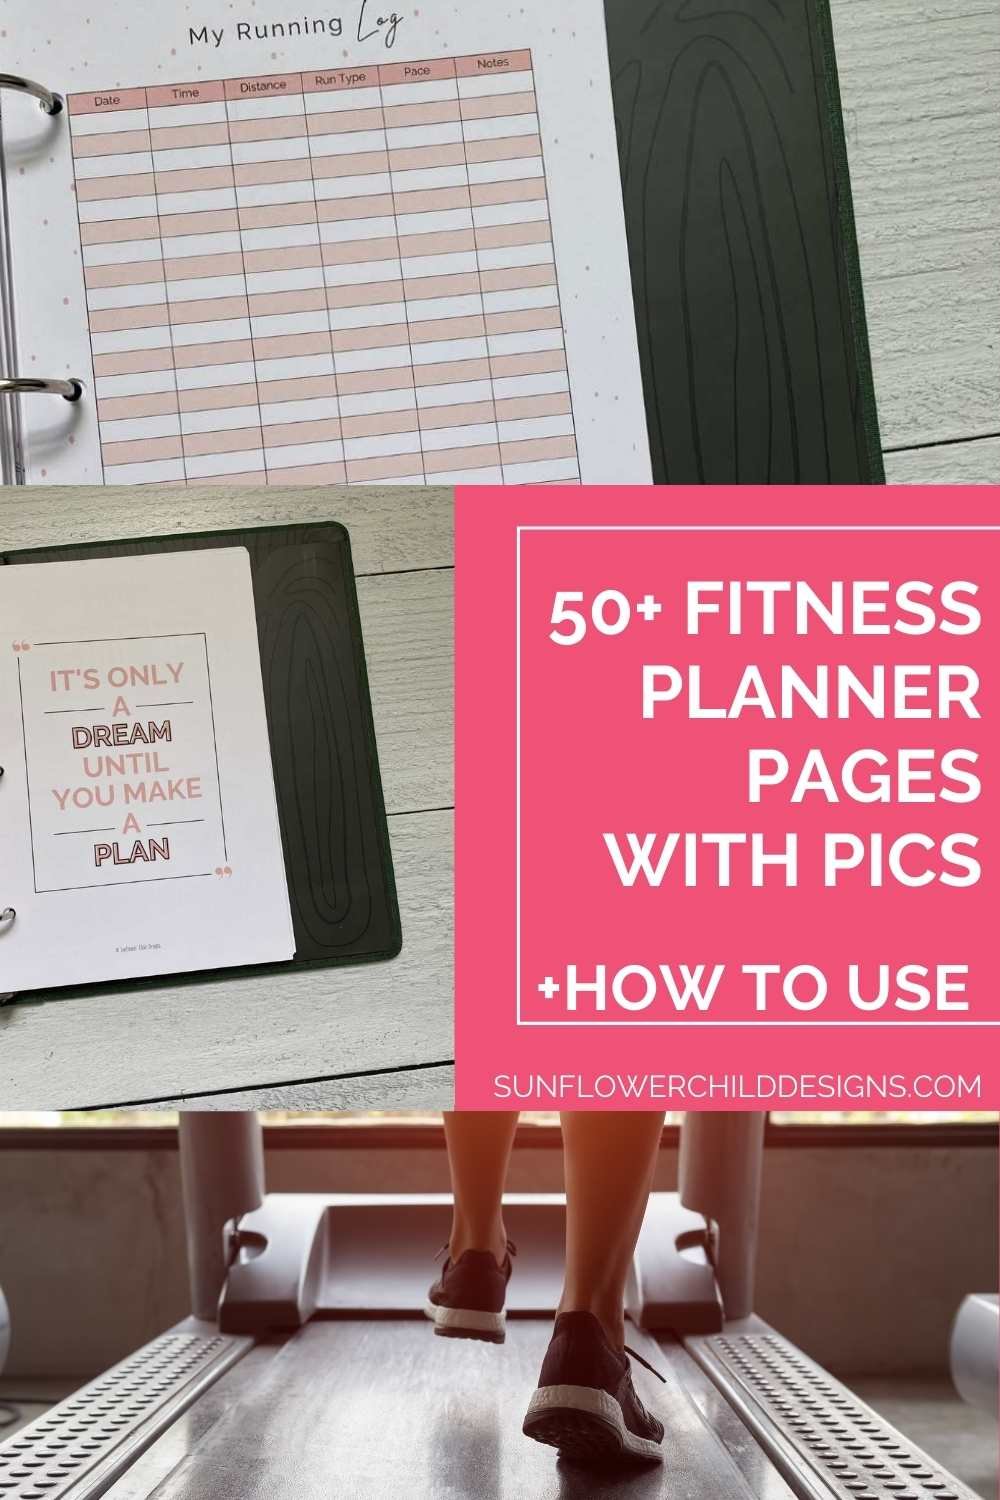 Unlock Your Fitness Goals: 50+ Inspiring Planner Pages to Motivate Your Workout